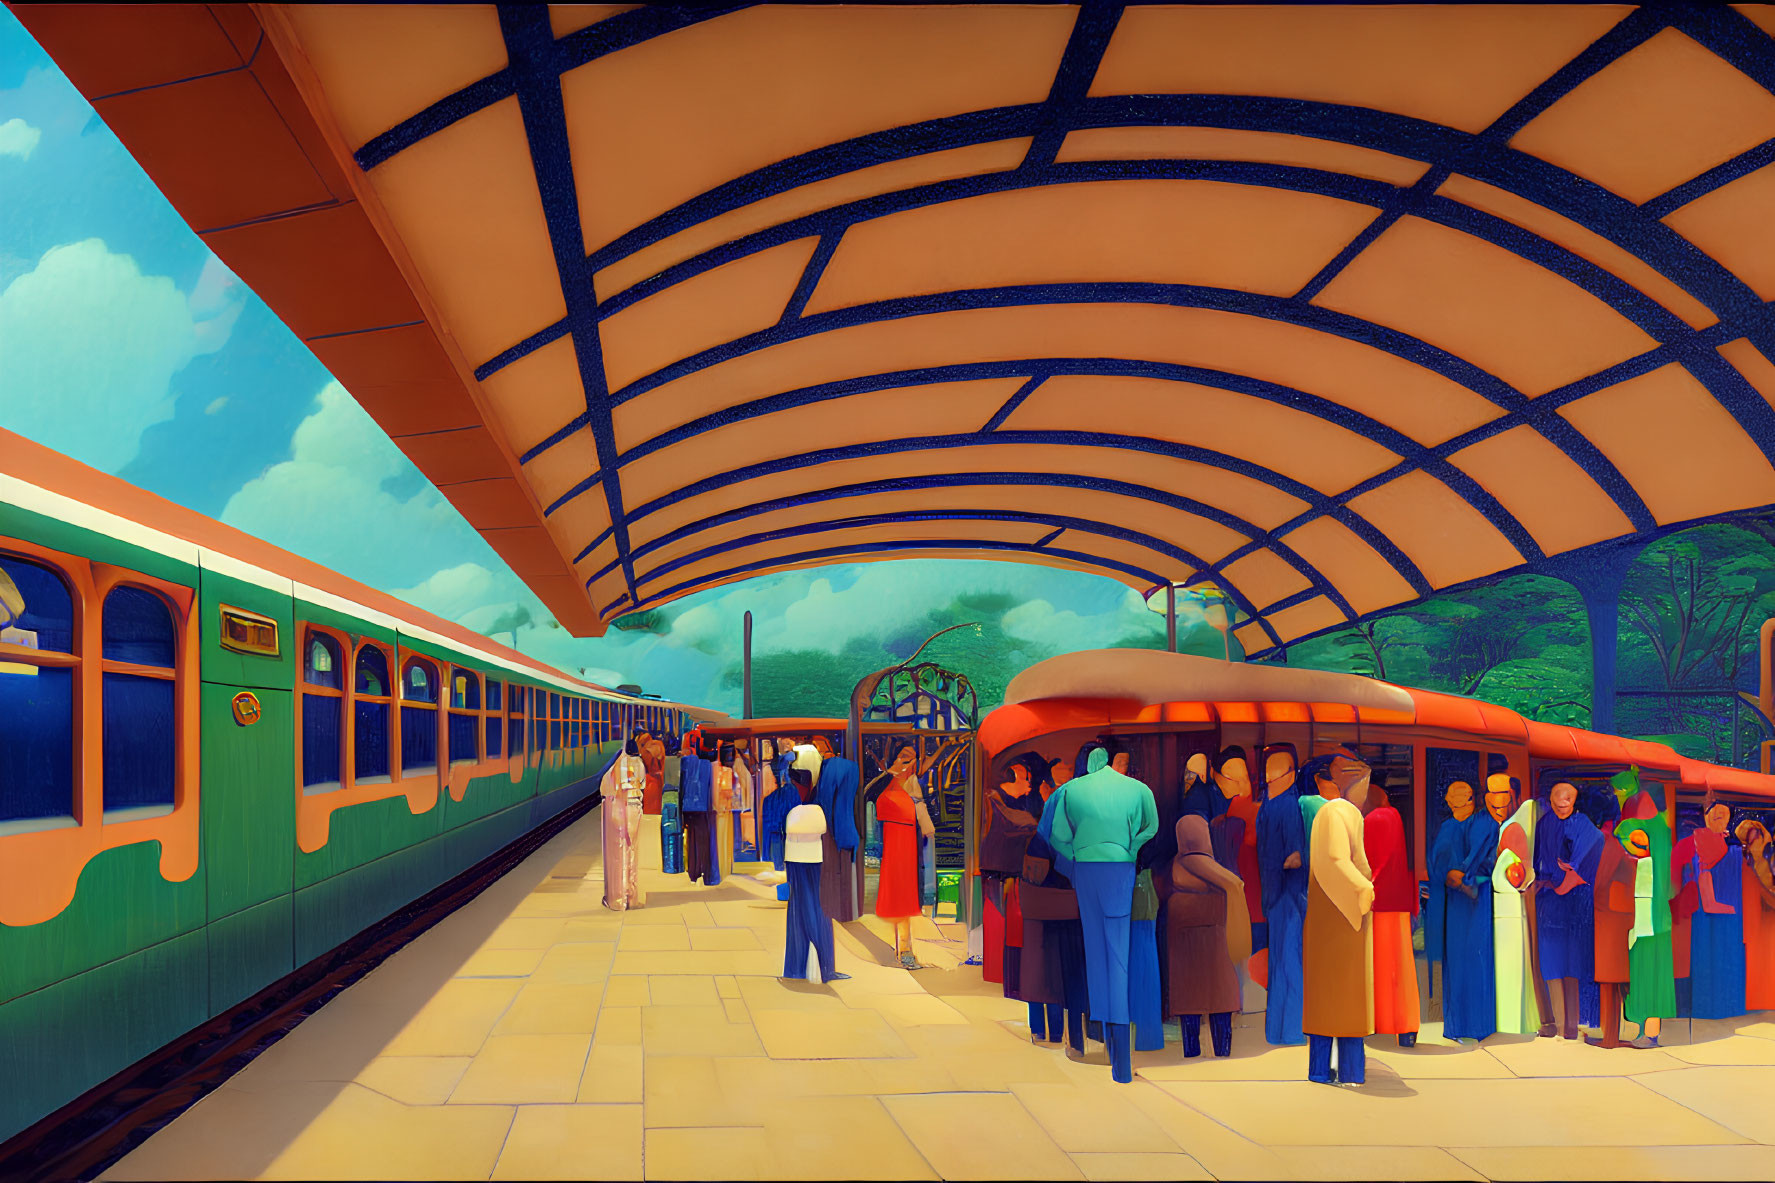 Vintage Train Station Illustration with Early 20th-Century Style People